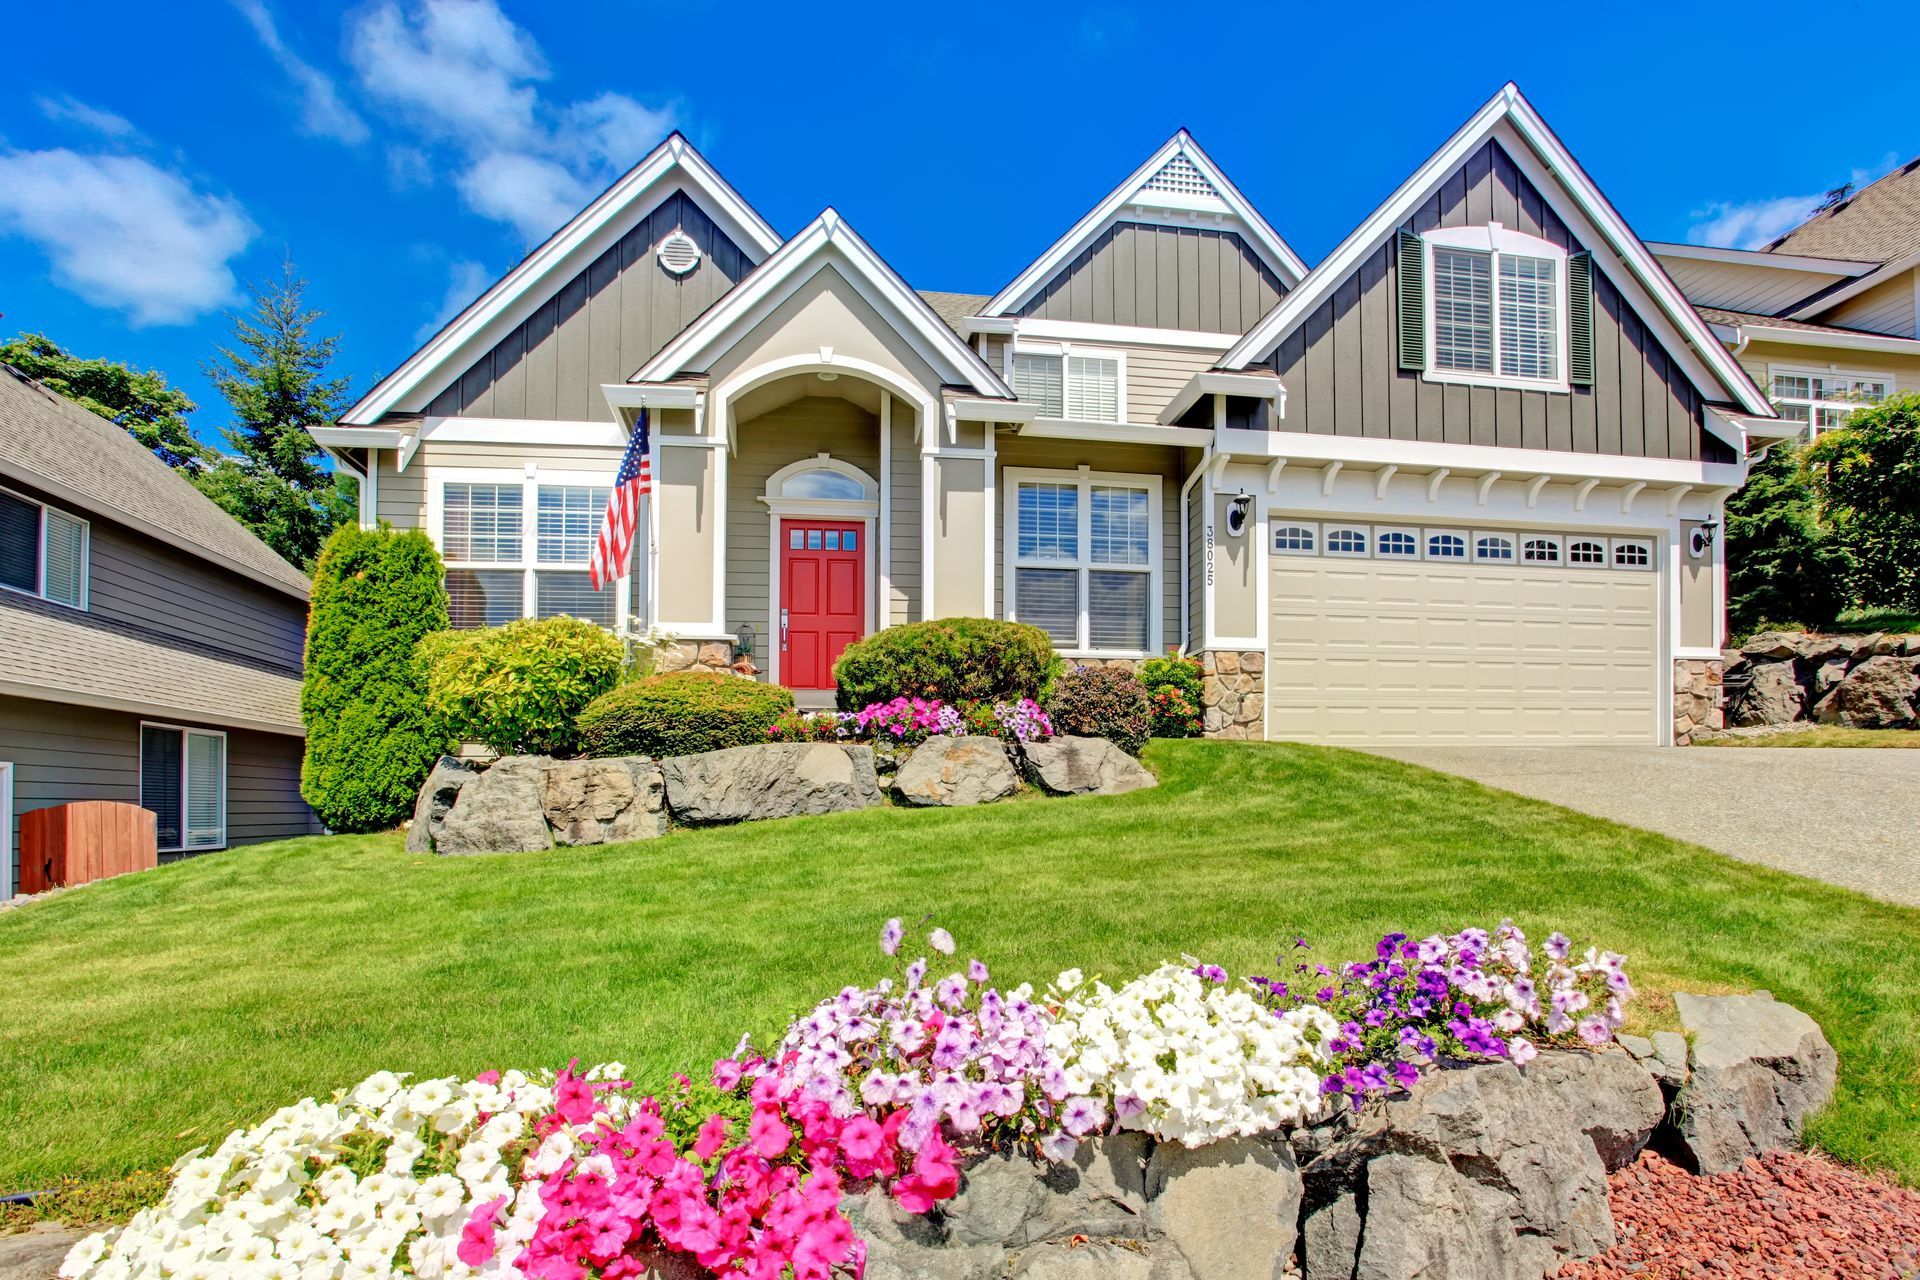 7 Ways To Boost Your Home's Curb Appeal